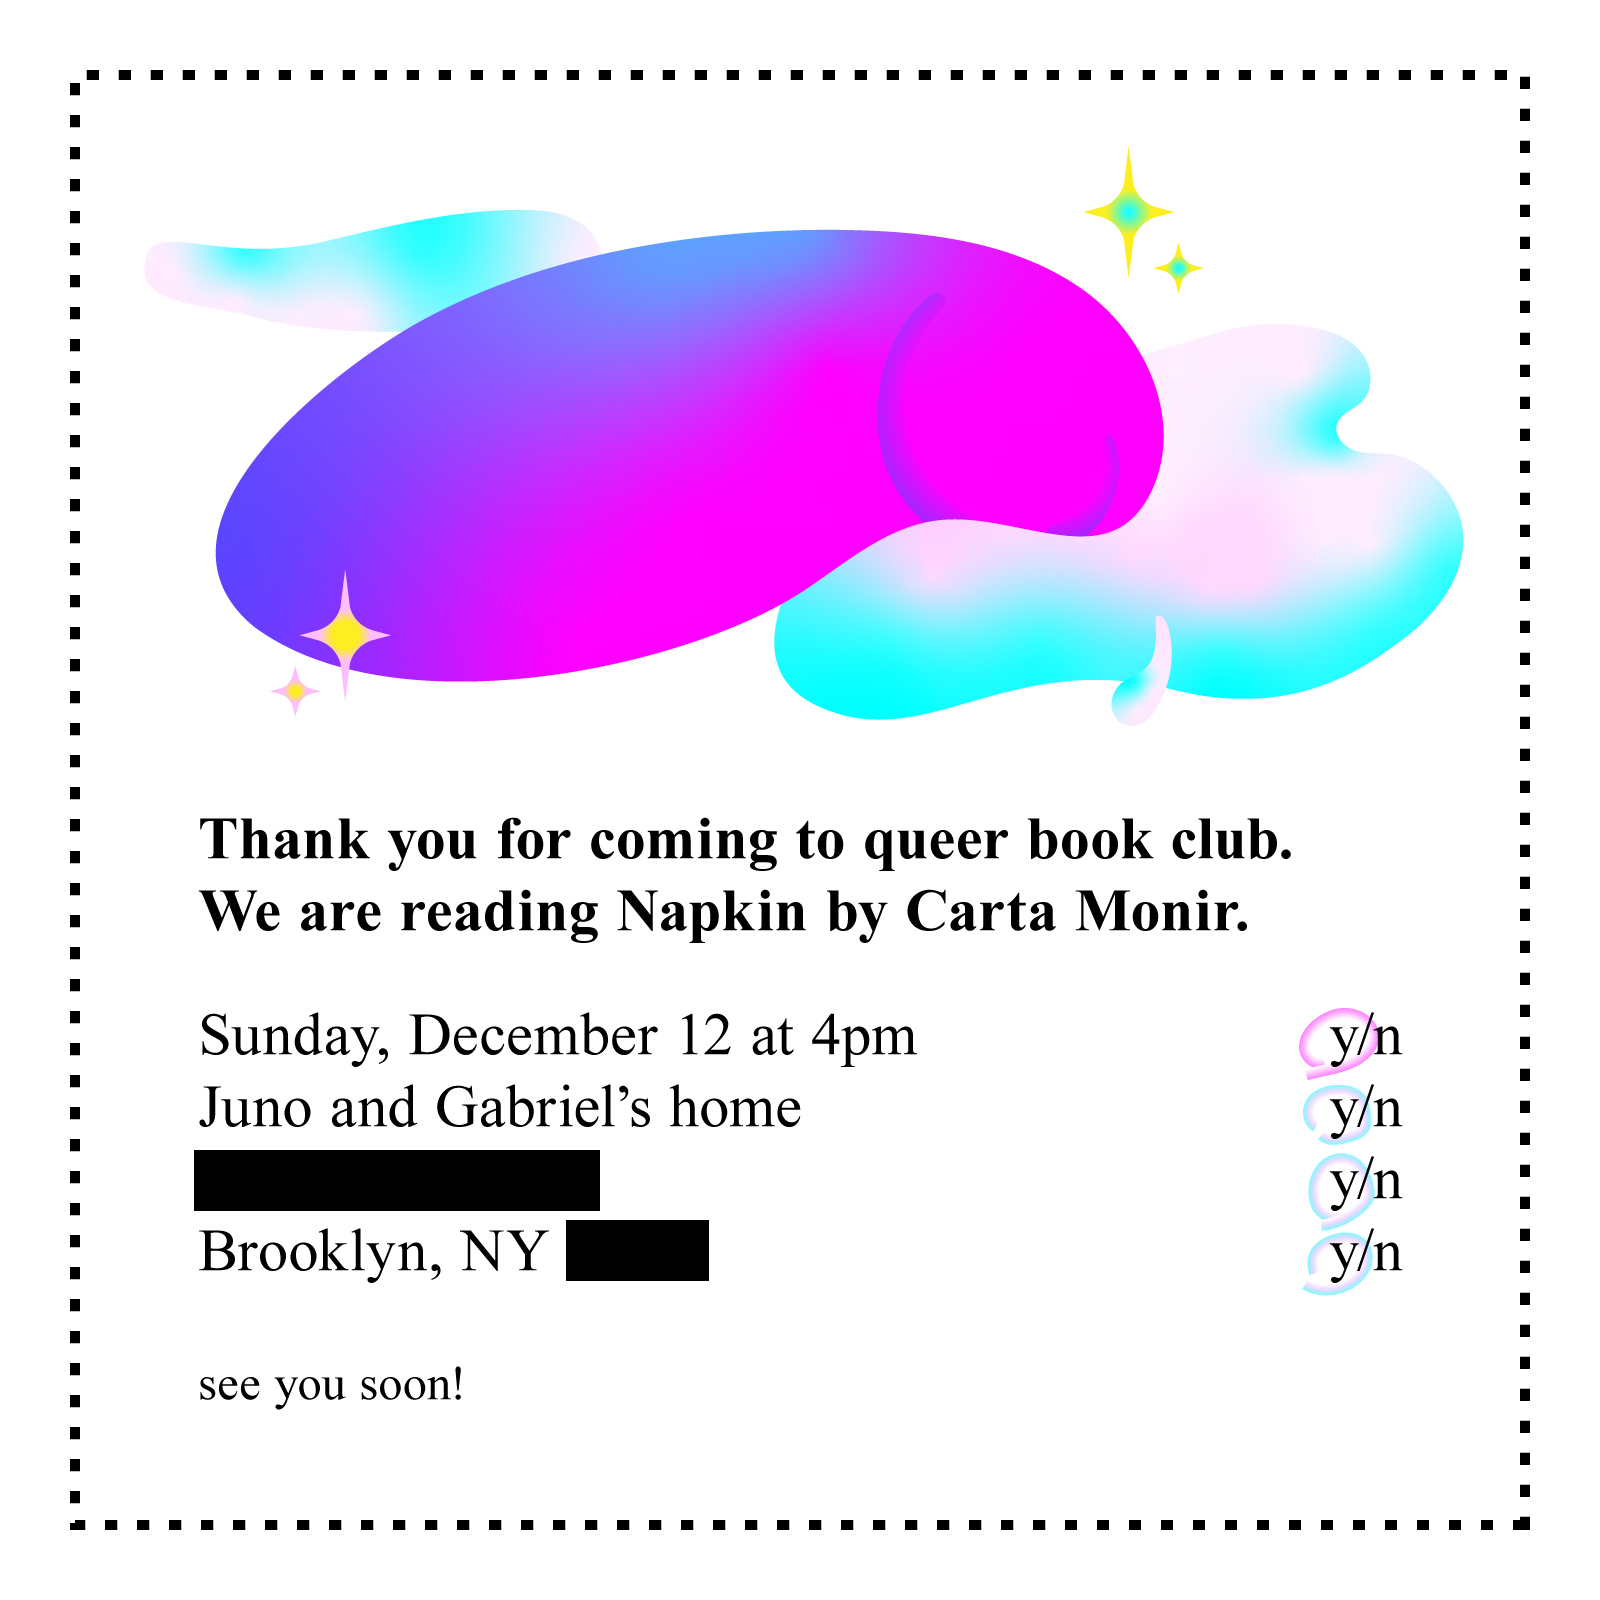 A white square with a hot pink abstract penis in a cyan-light pink puddle, inviting you to queer book club for Napkin by Carta Monir.